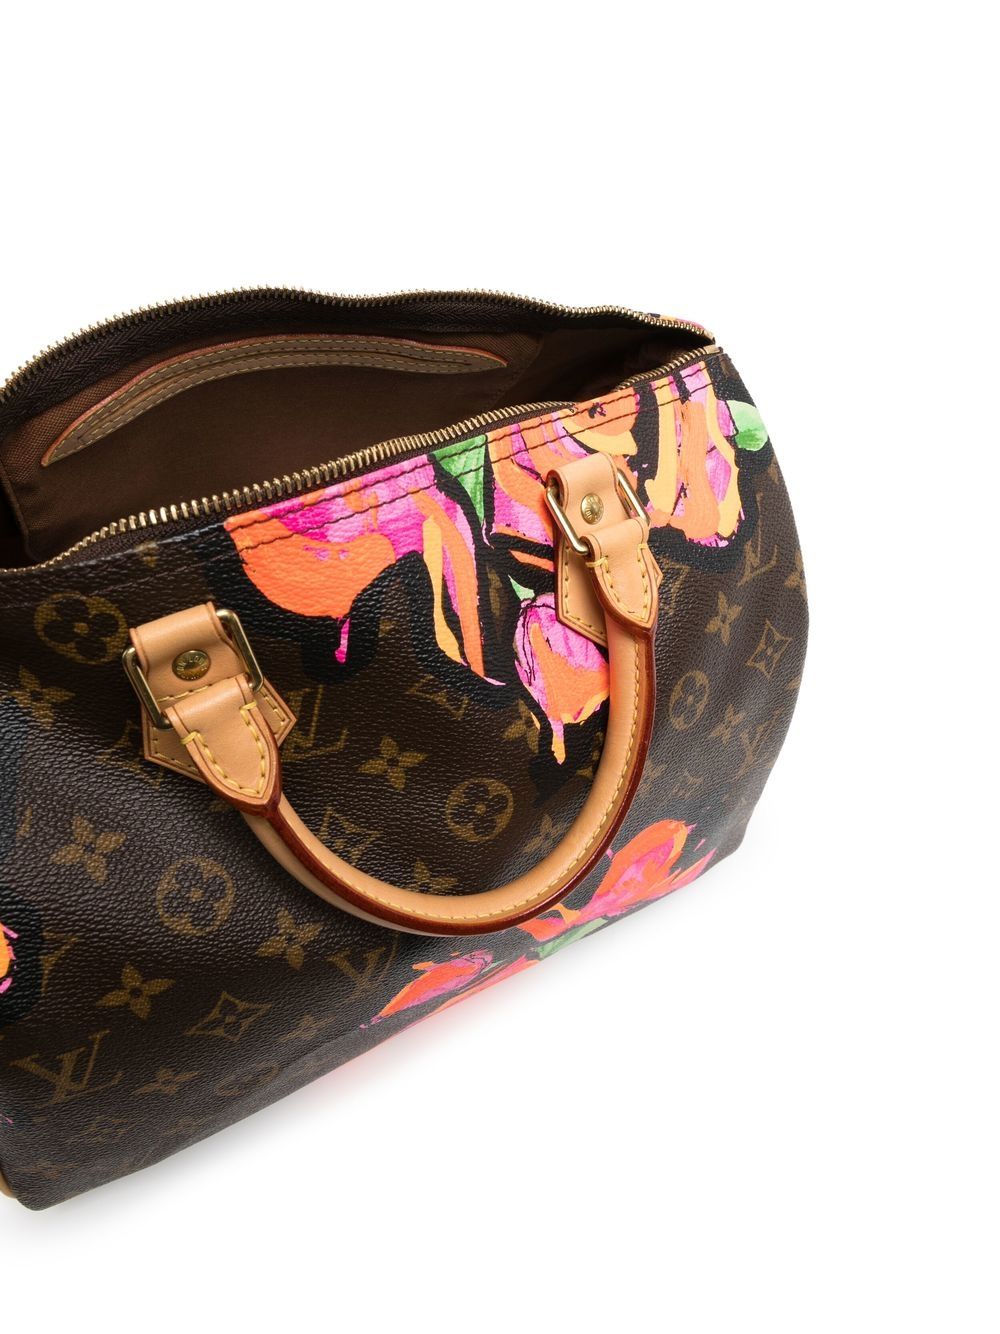 Louis Vuitton X Takashi Murakami 2008 Pre-Owned Limited Edition Speedy 35  Bag - Green for Women